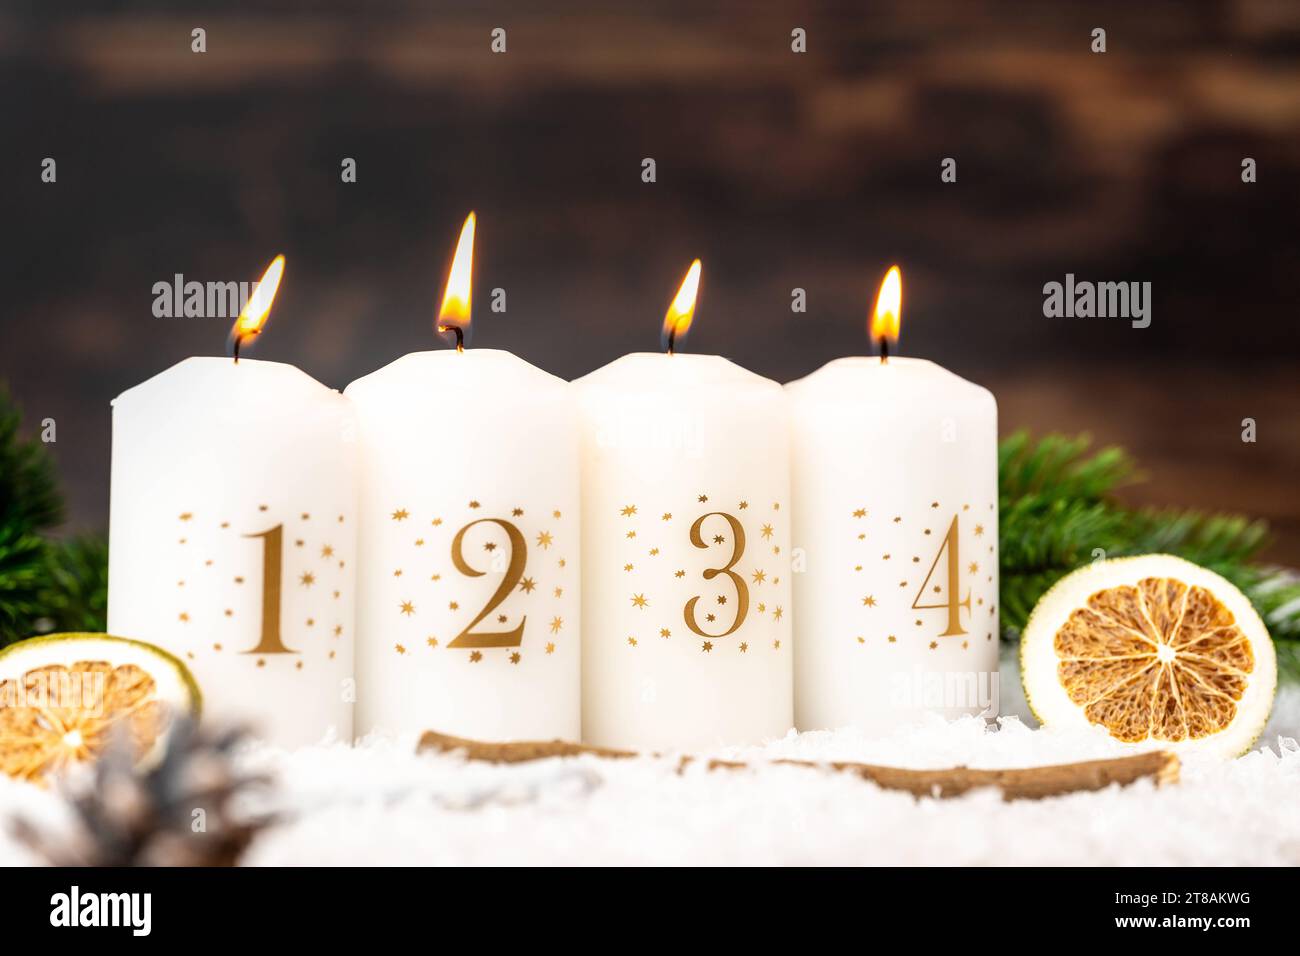 Augsburg, Bavaria, Germany - November 17, 2023: Four candles burning on the fourth Advent. 4th Sunday of Advent symbolic image, white candles in winter landscape *** Vier Kerzen brennen am vierten Advent. 4. Adventssonntag Symbolbild, weiße Kerzen in Winterlandschaft Credit: Imago/Alamy Live News Stock Photo